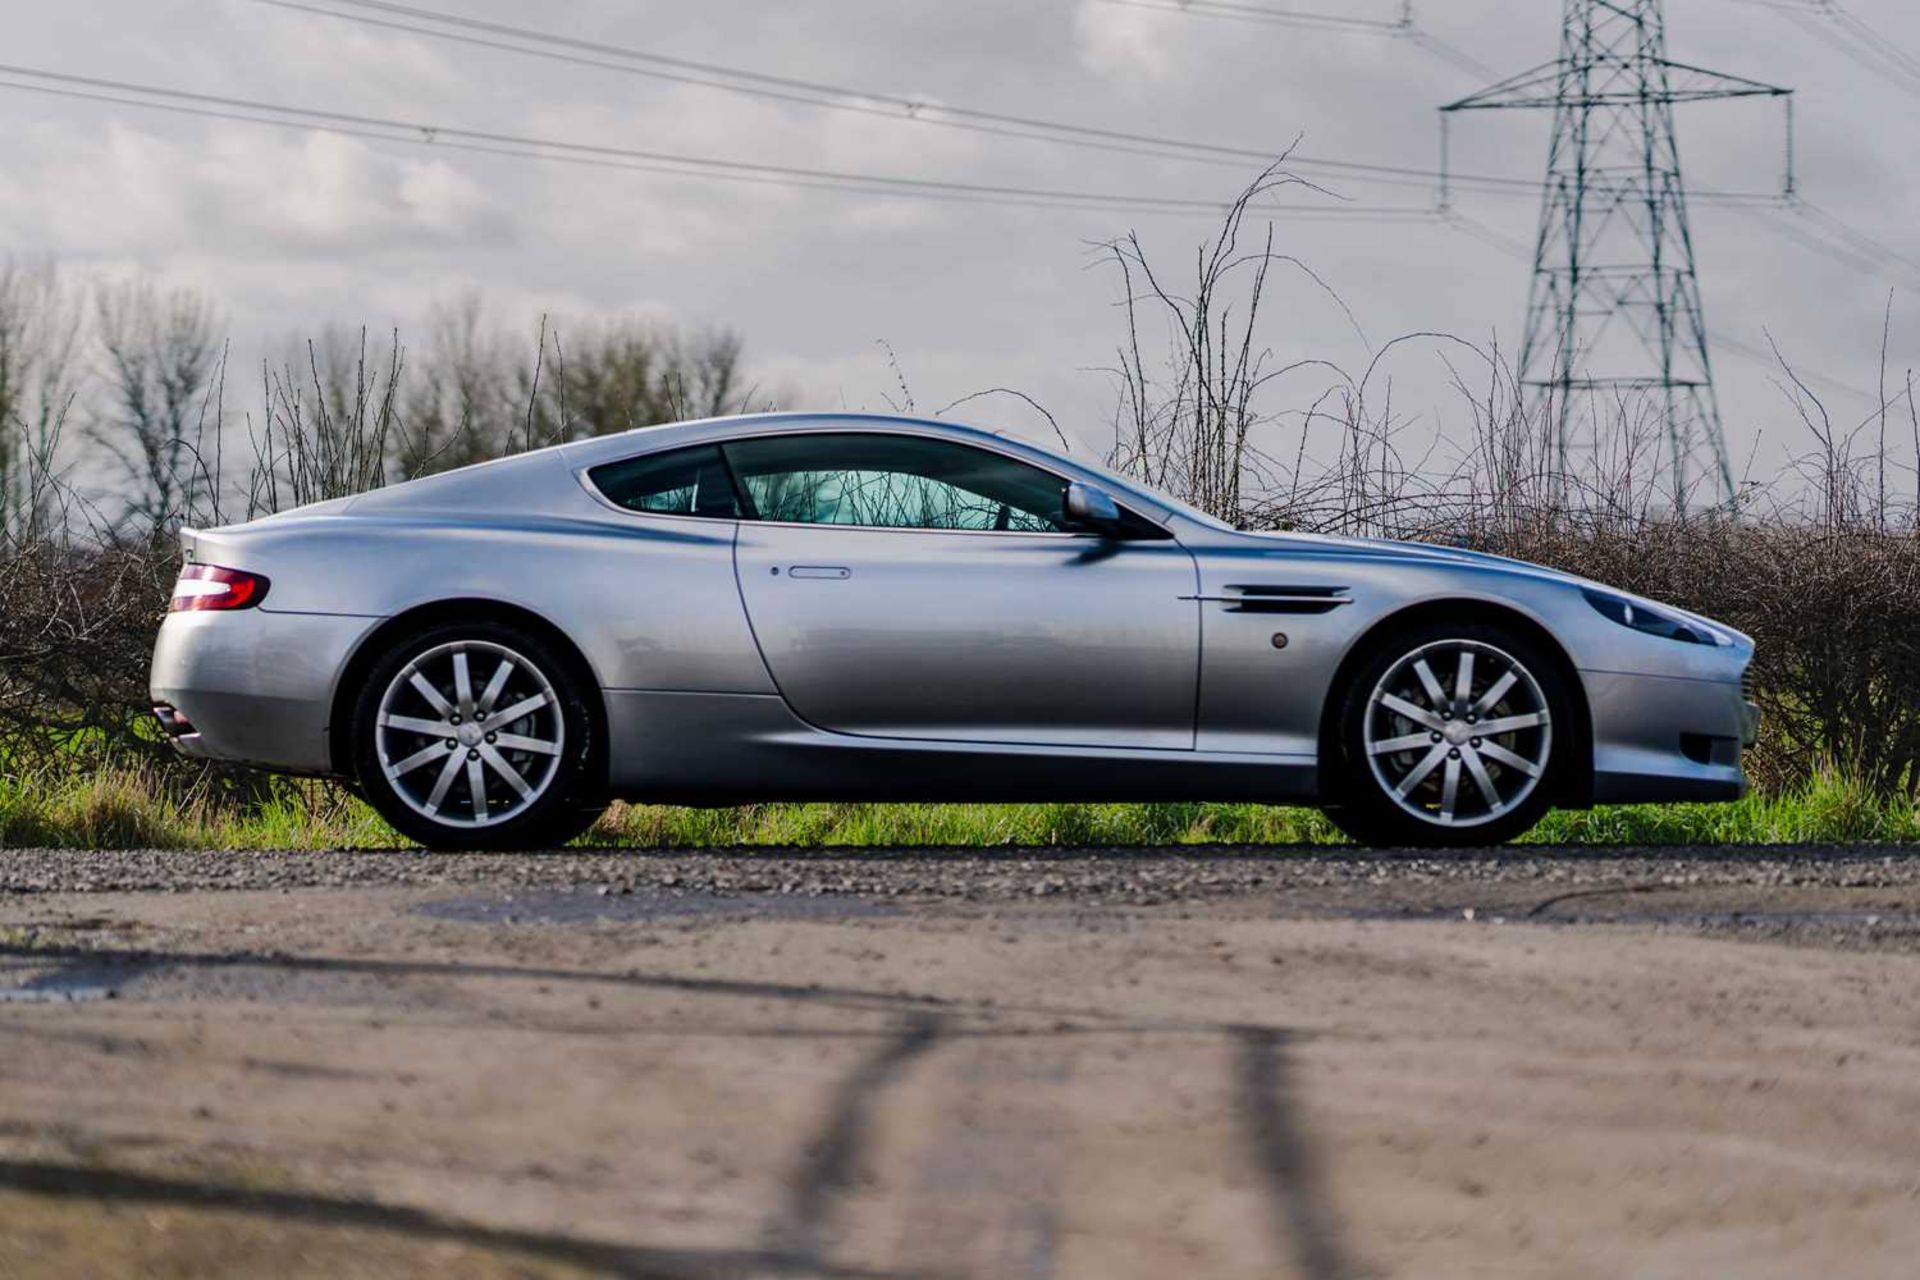 2005 Aston Martin DB9 V12 Only 33,000 miles with full Aston Martin service history - Image 13 of 70